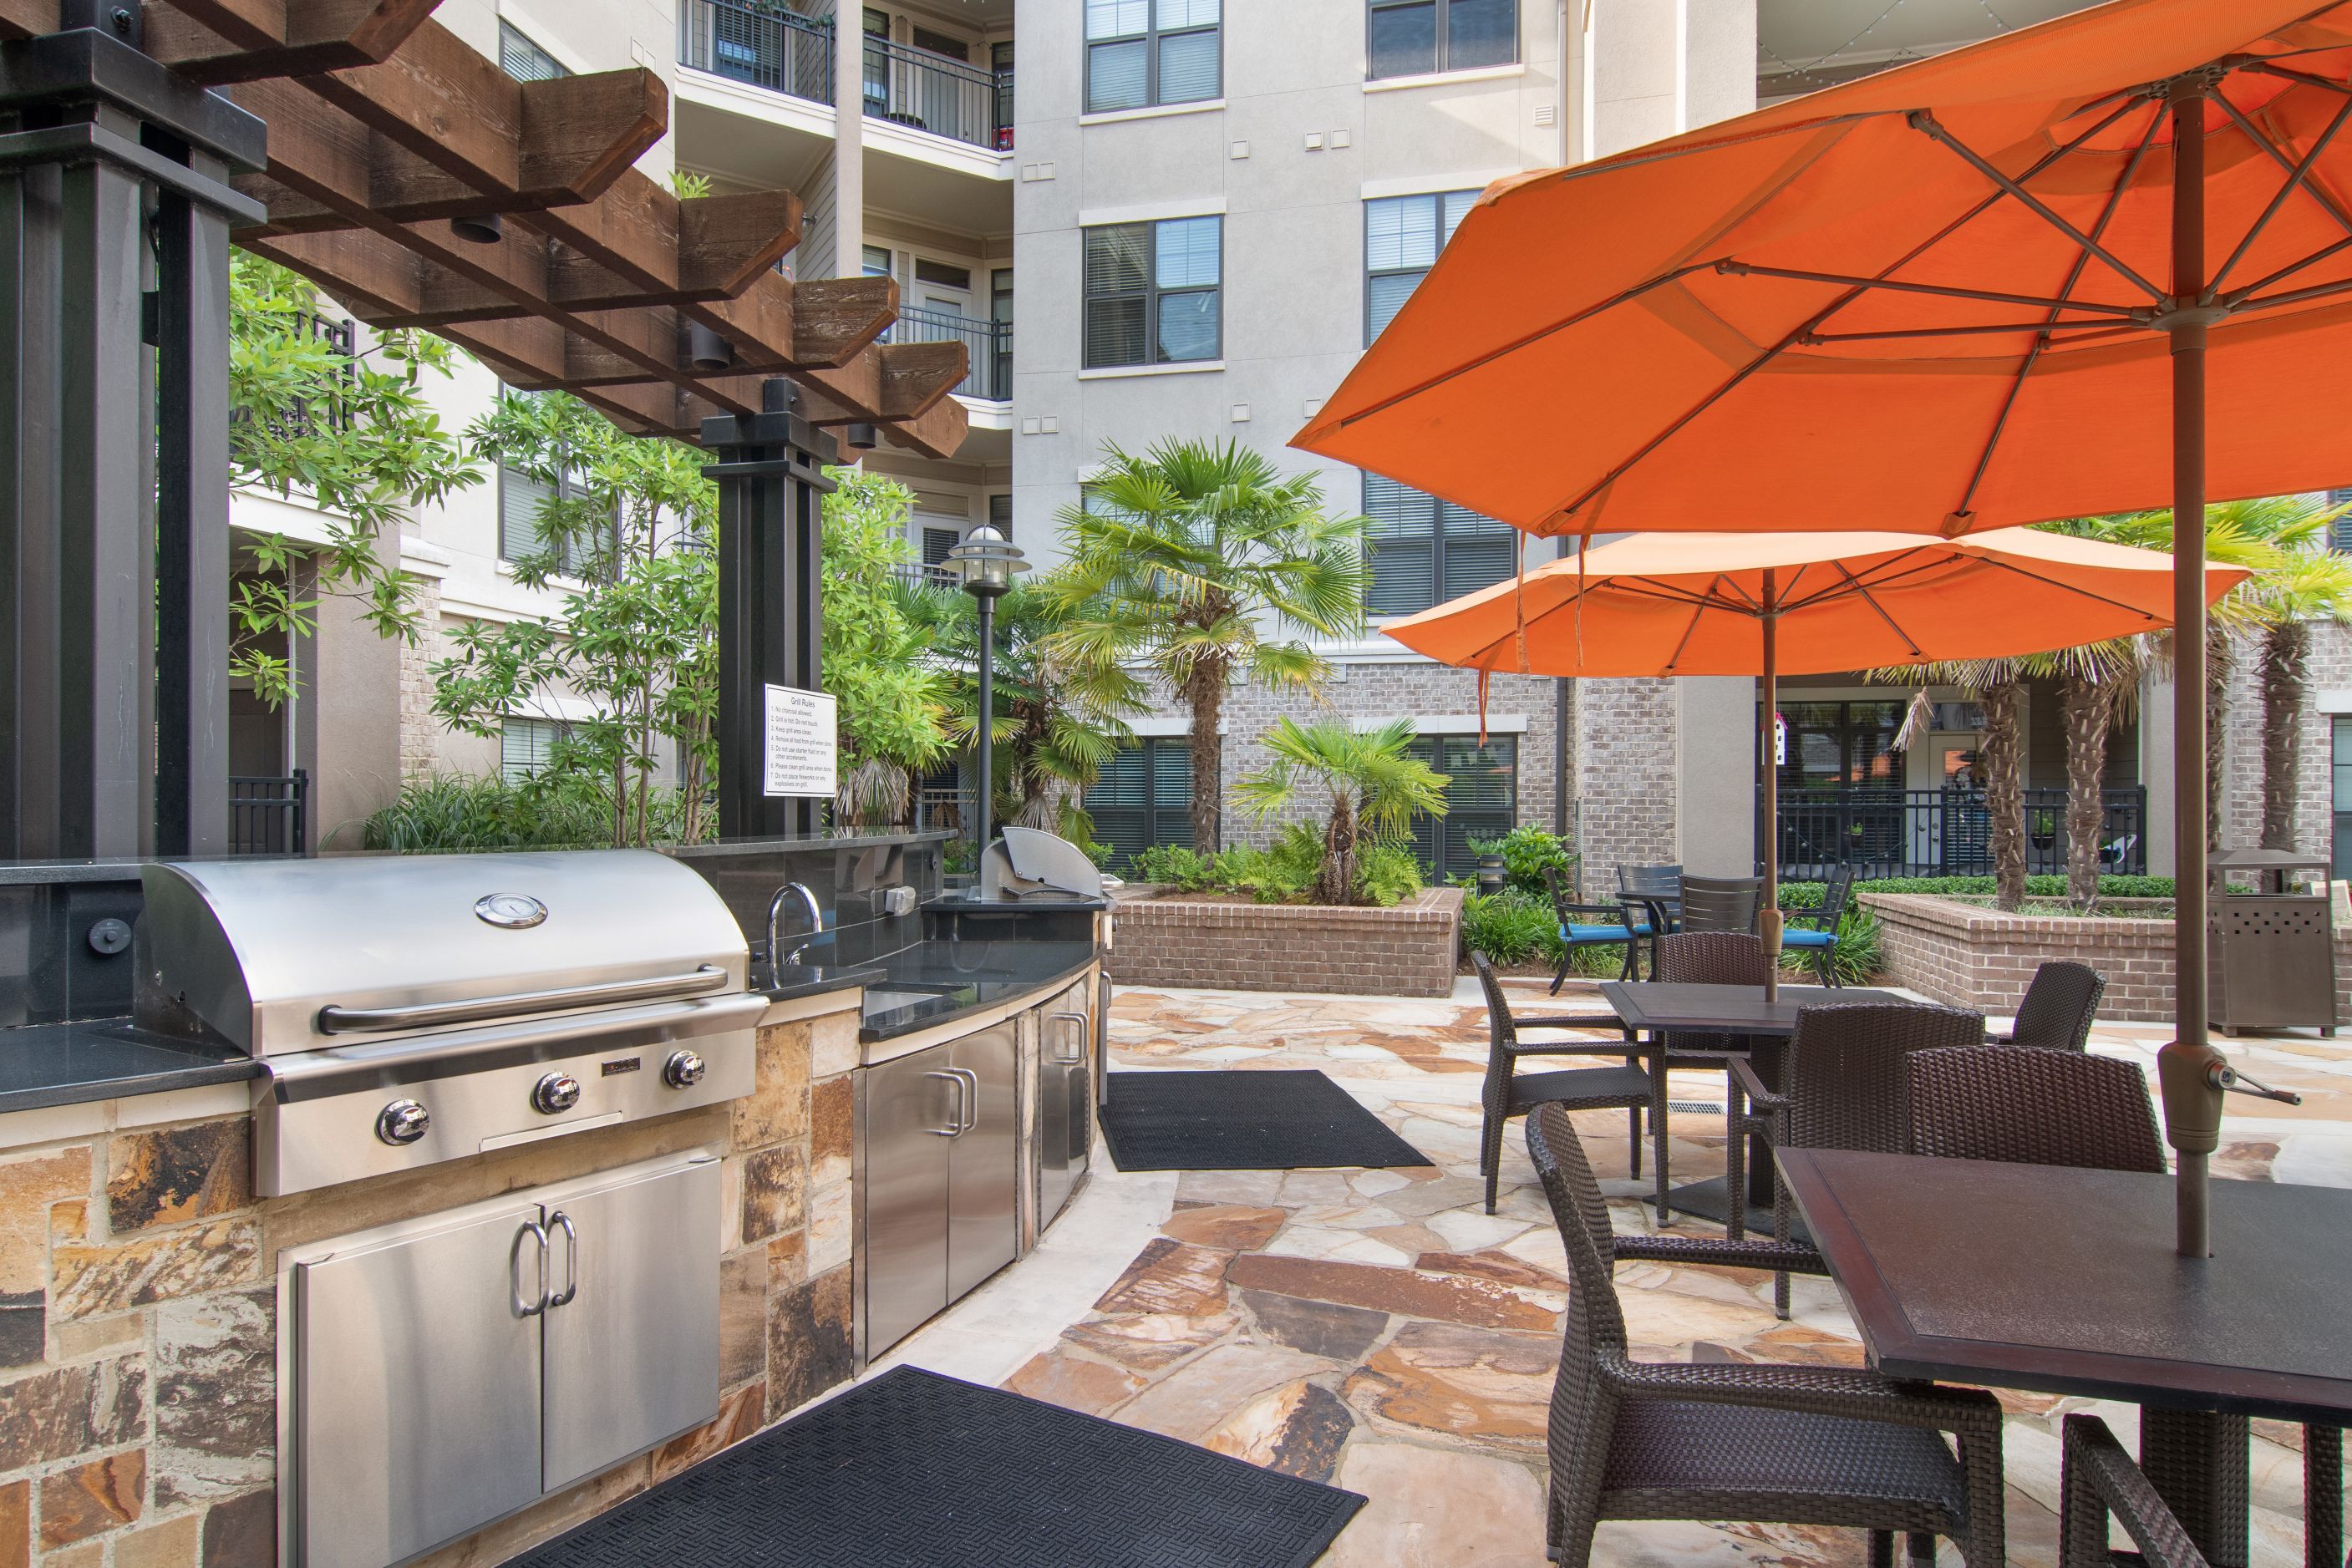 Grilling & Cabana Areas at Brookleigh Flats Apartments in Brookhaven, Georgia